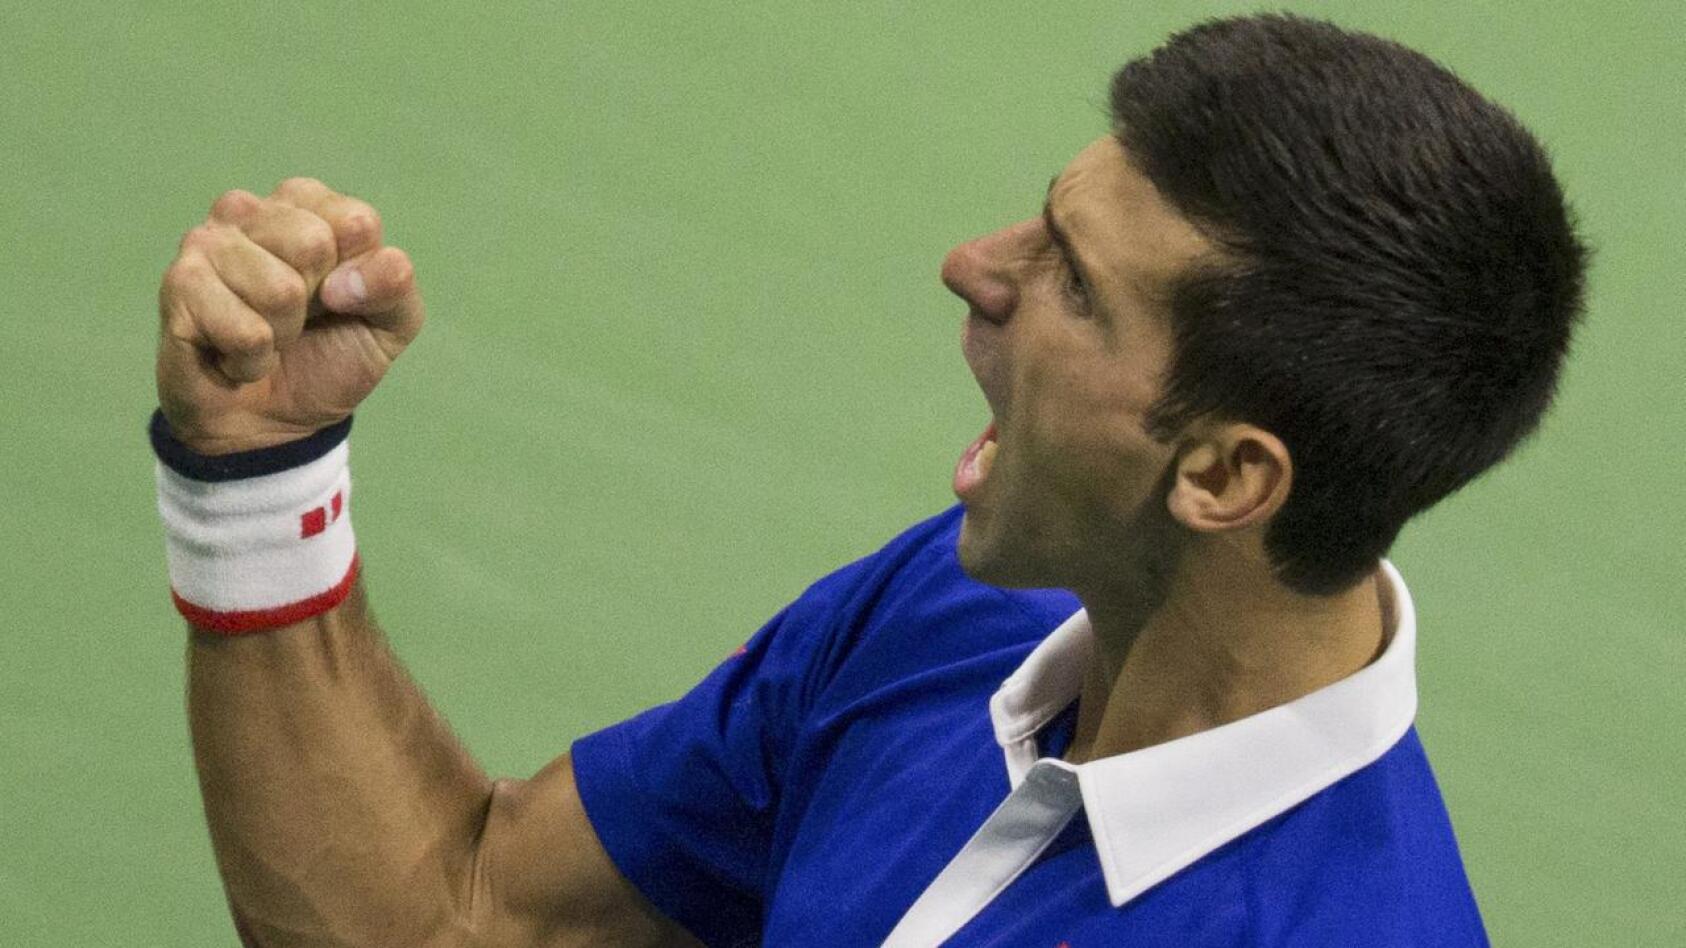 Novak Djokovic of Serbia celebrates winning a point against Roger Federer of Switzerland in the third set during their men's singles final match at the US Open in New York, in 2015